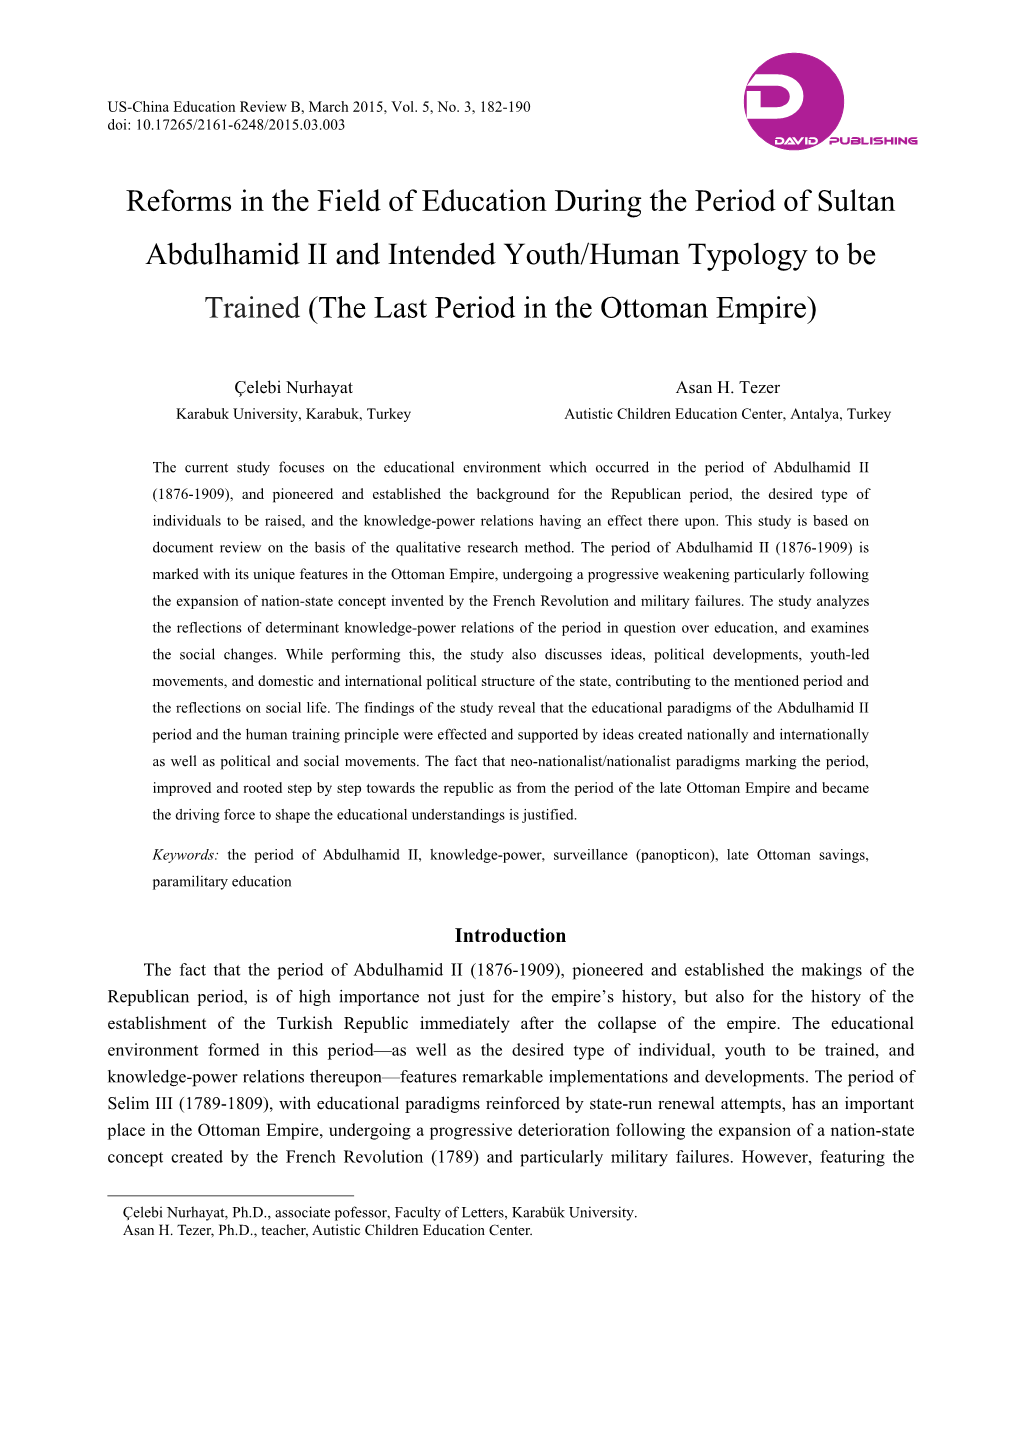 Reforms in the Field of Education During the Period of Sultan Abdulhamid II and Intended Youth/Human Typology to Be Trained (The Last Period in the Ottoman Empire)